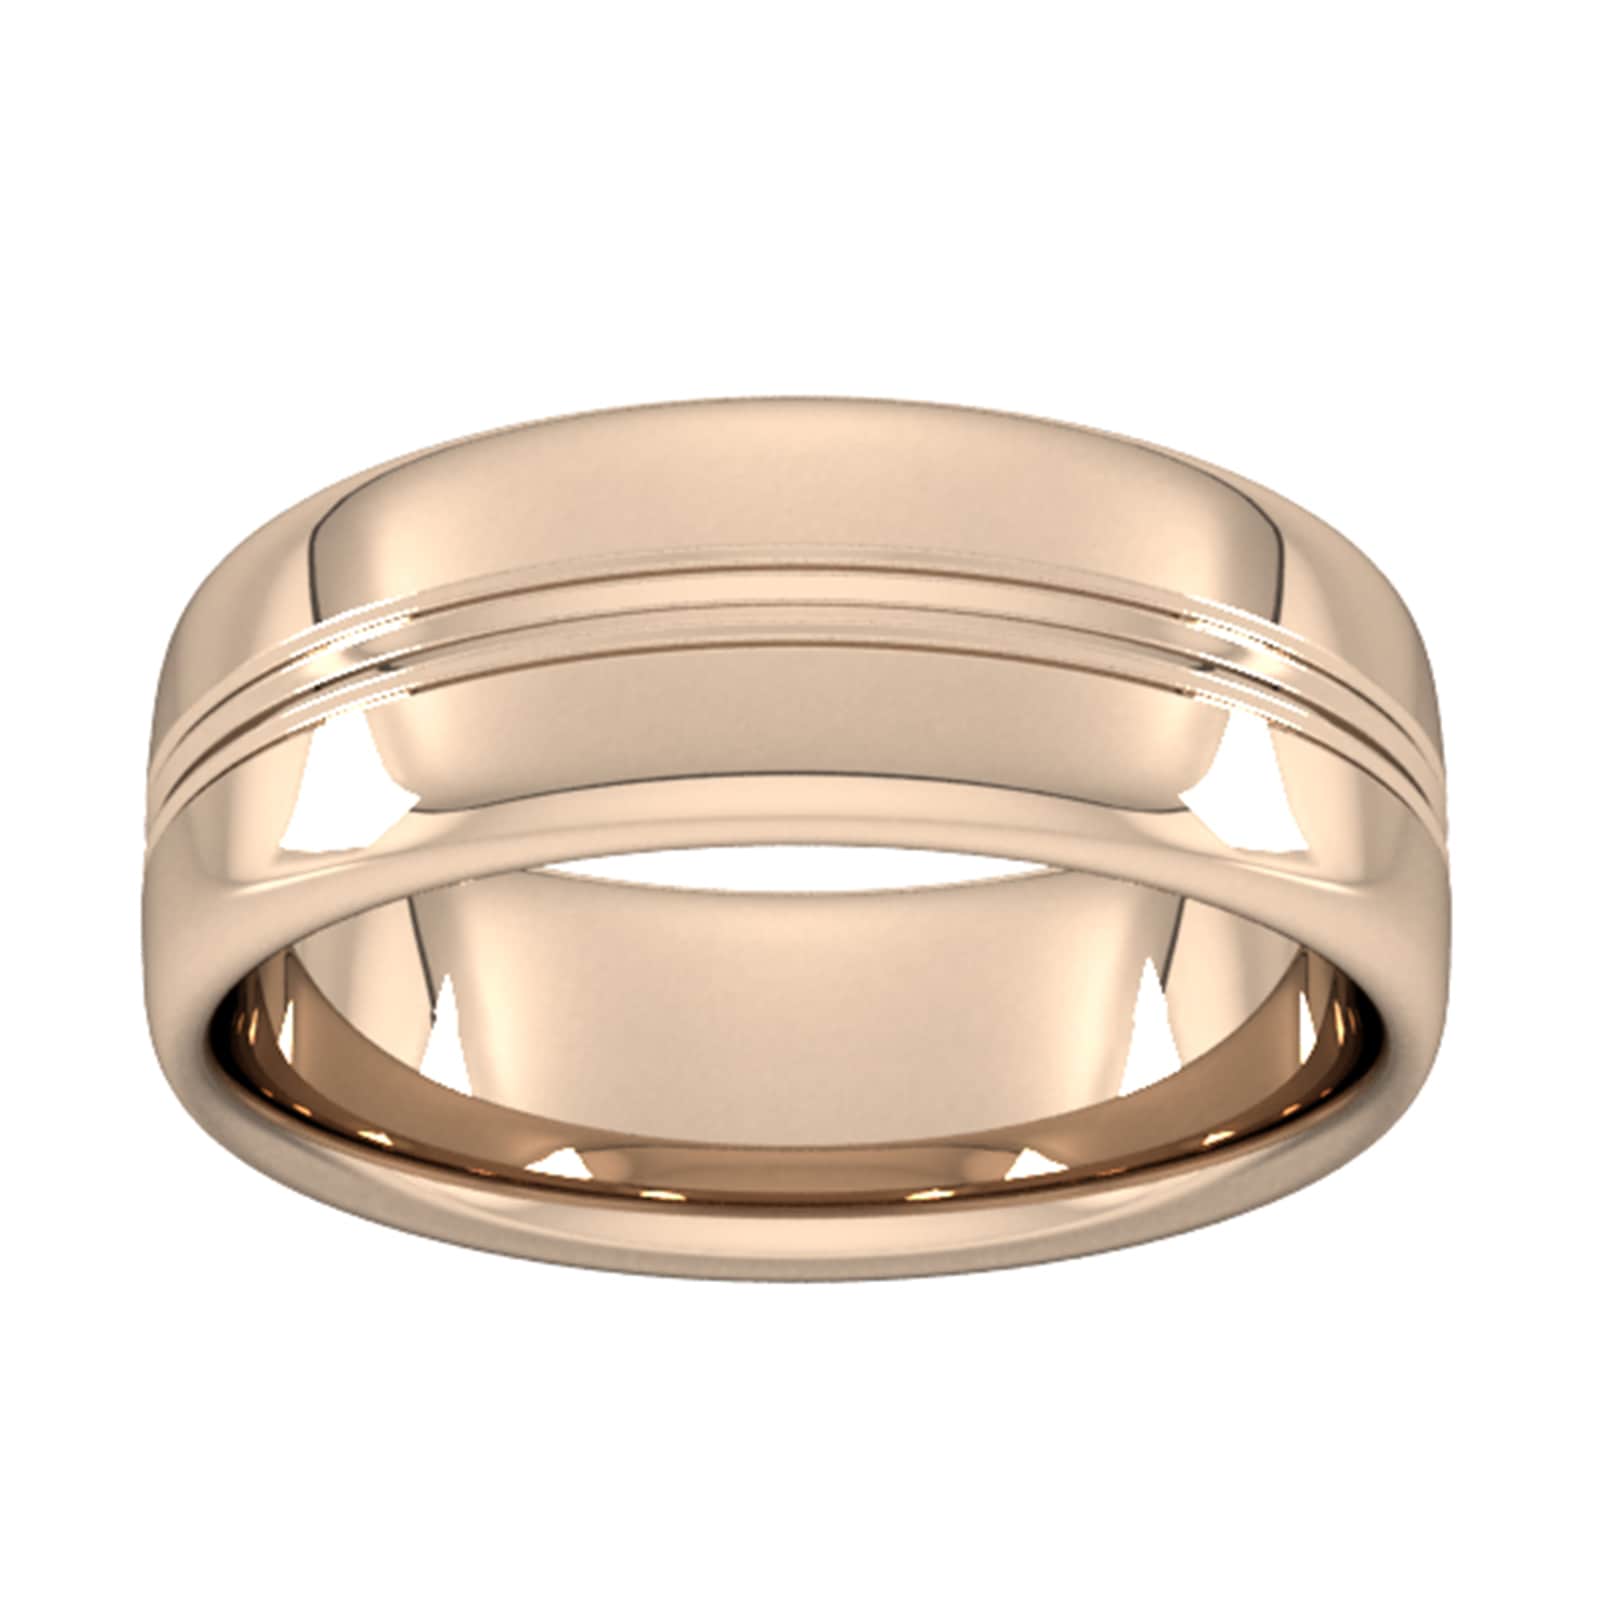 8mm Slight Court Heavy Grooved Polished Finish Wedding Ring In 18 Carat Rose Gold - Ring Size X